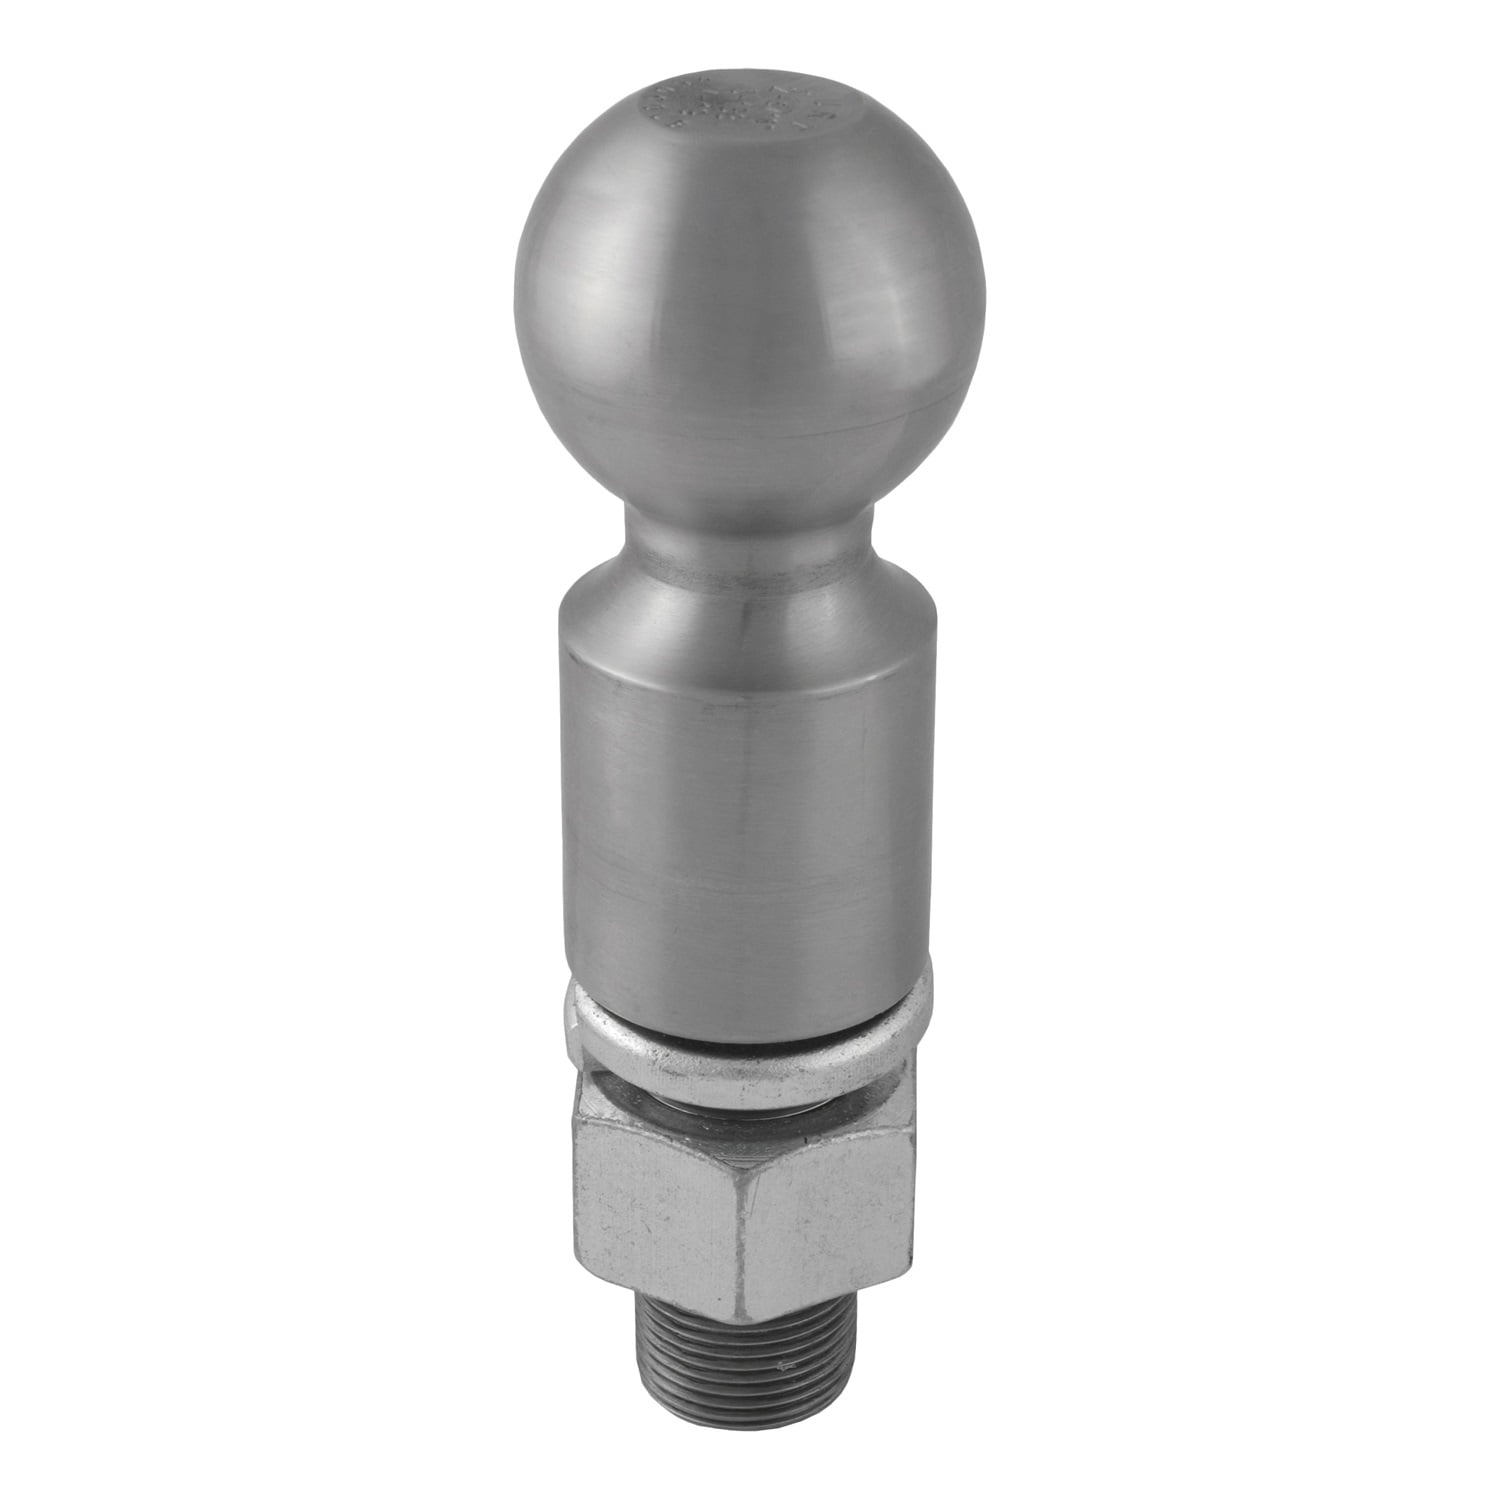 2-5/16-Inch Diameter Tow Ball with 1-1/4-Inch x 2-5/8-Inch Shank 2-Inch Rise 25,000 lbs. CURT 40087 Raw Steel Trailer Hitch Ball 